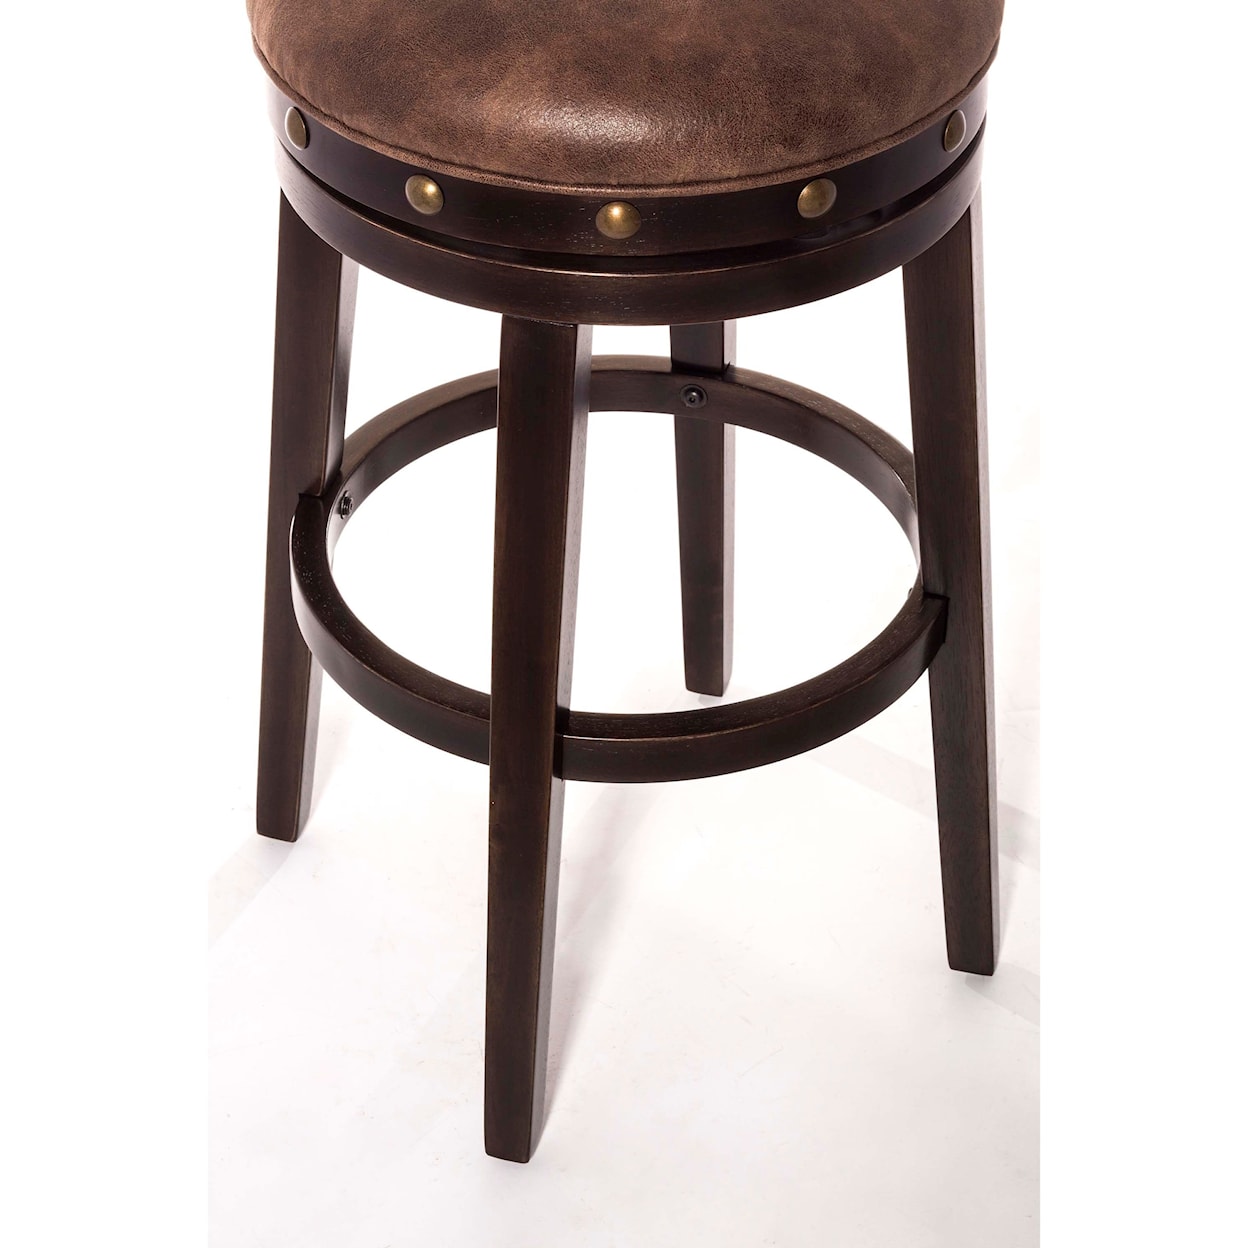 Hillsdale Backless Bar Stools Backless Counter Stool